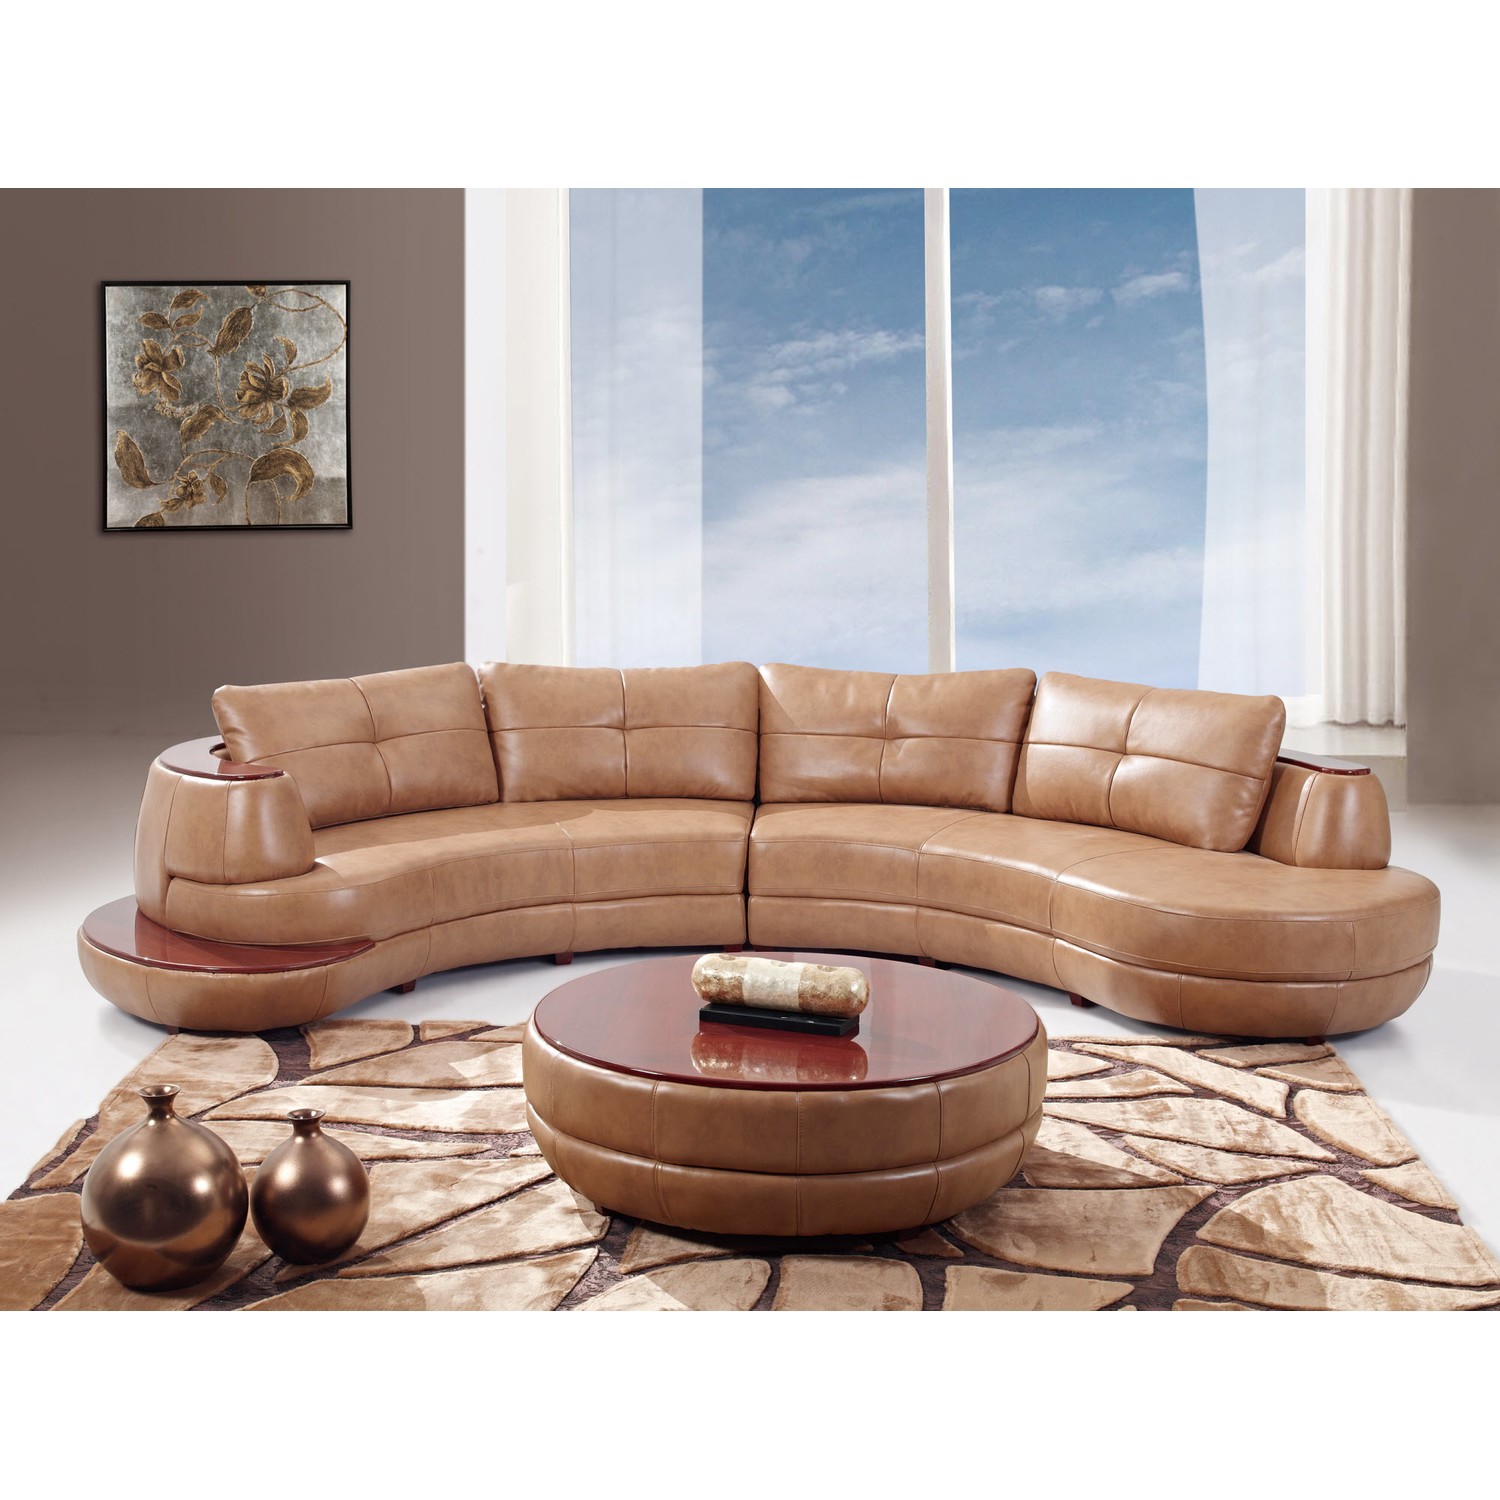 Honey bonded leather sectional